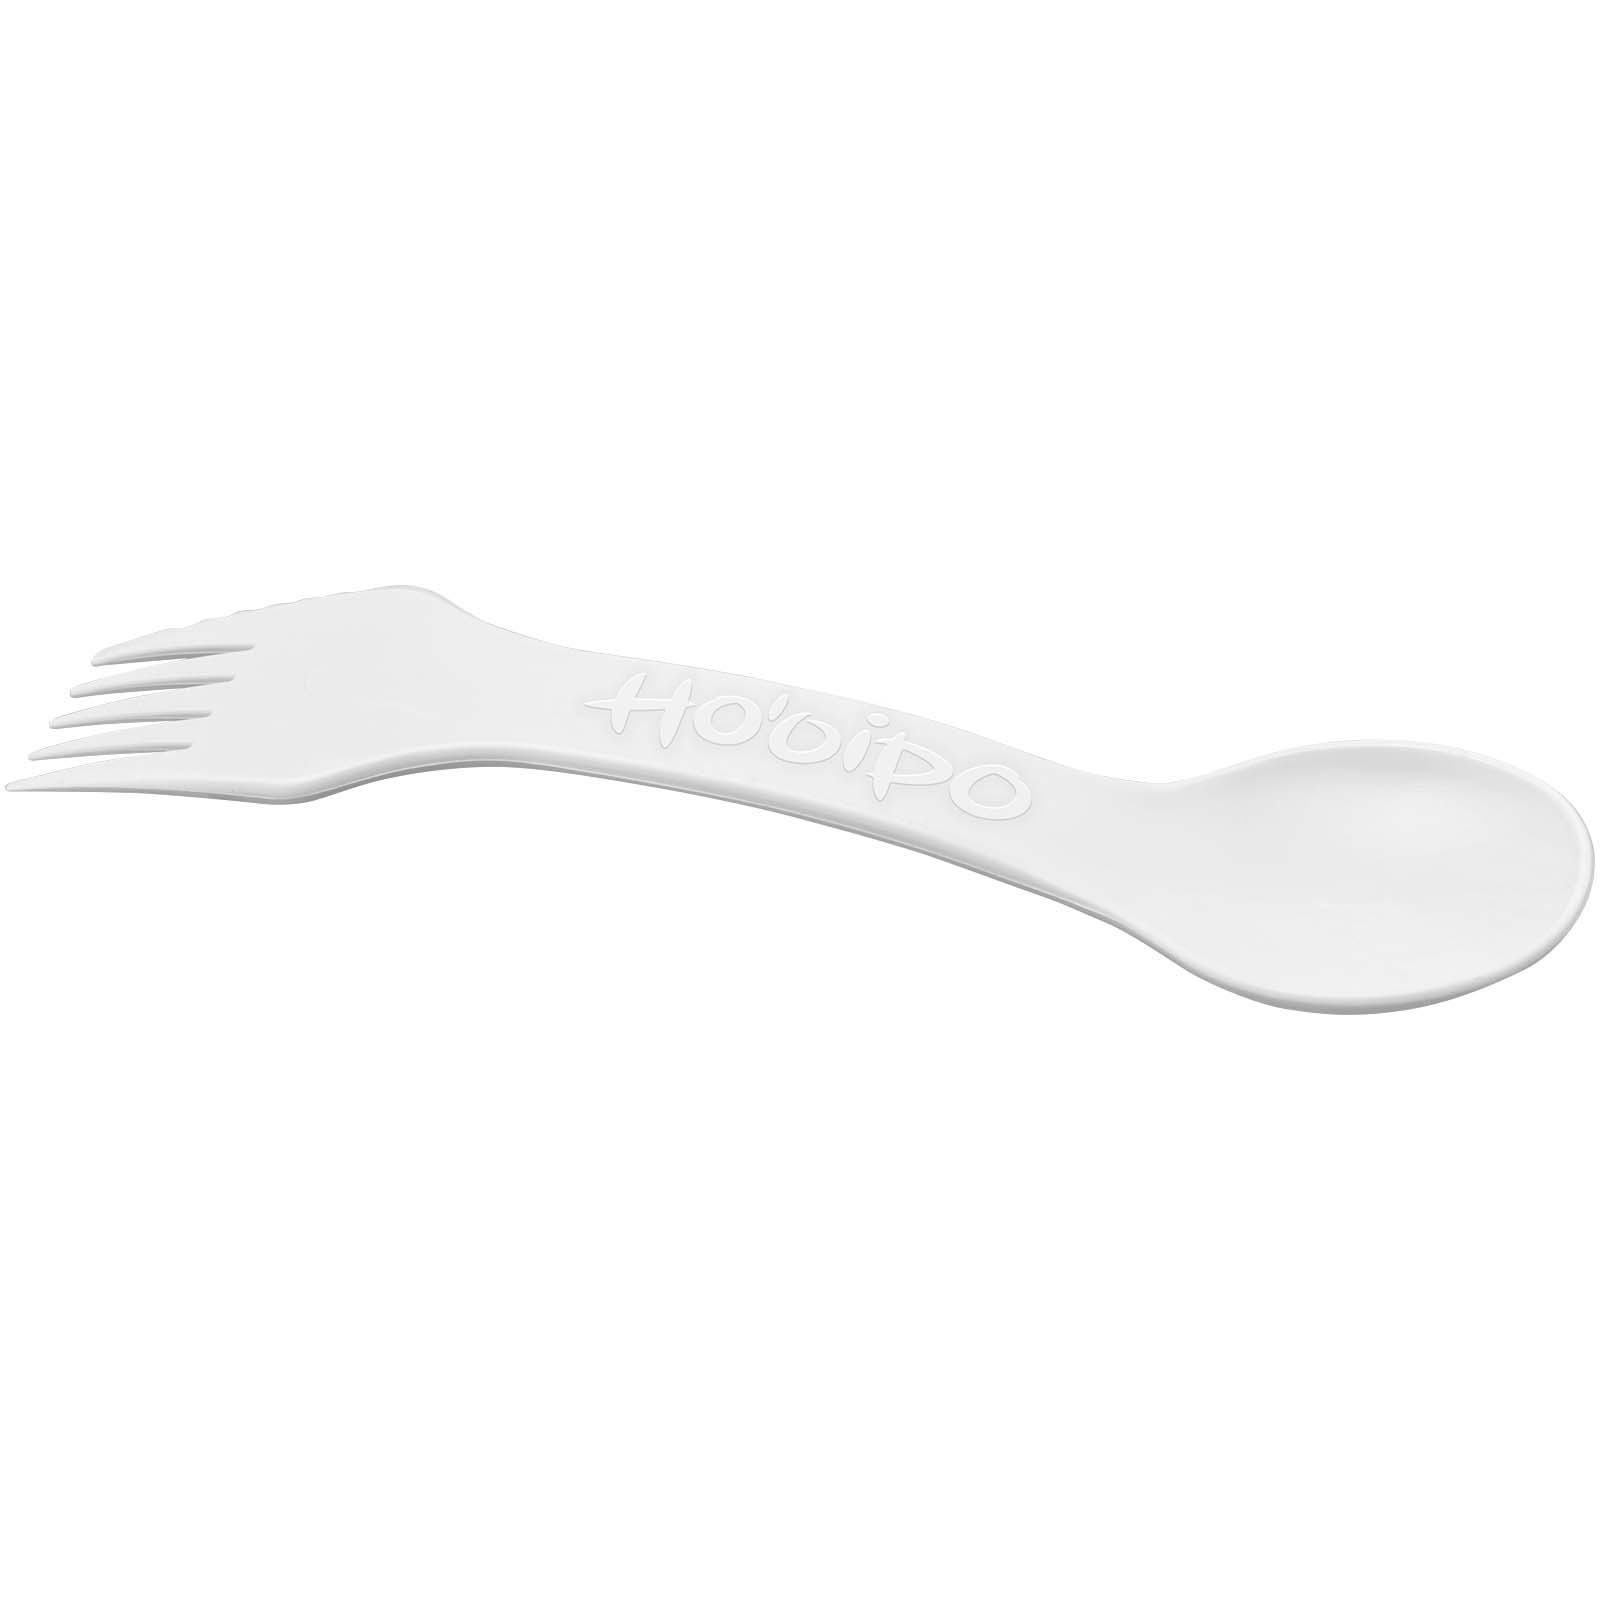 Advertising Home Accessories - Epsy Rise spork - 0